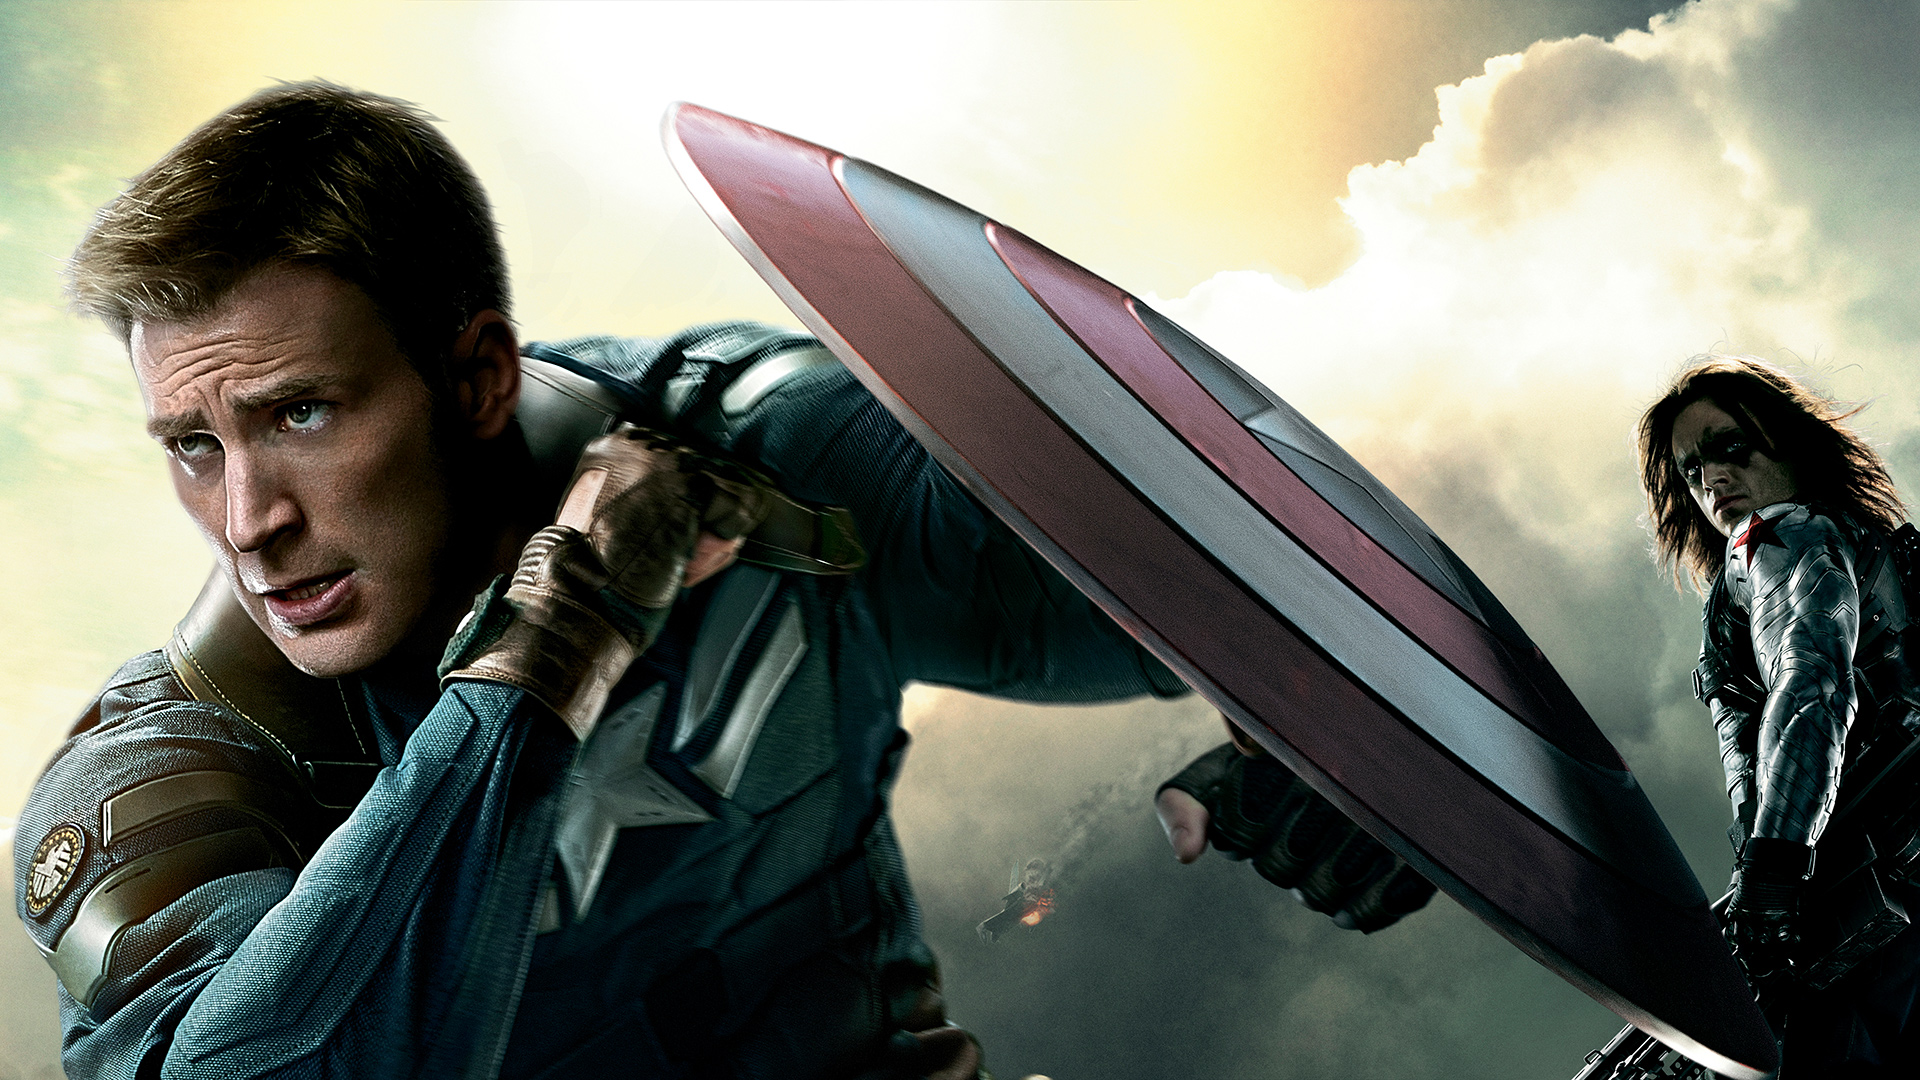 Movie Captain America: The Winter Soldier HD Wallpaper | Background Image